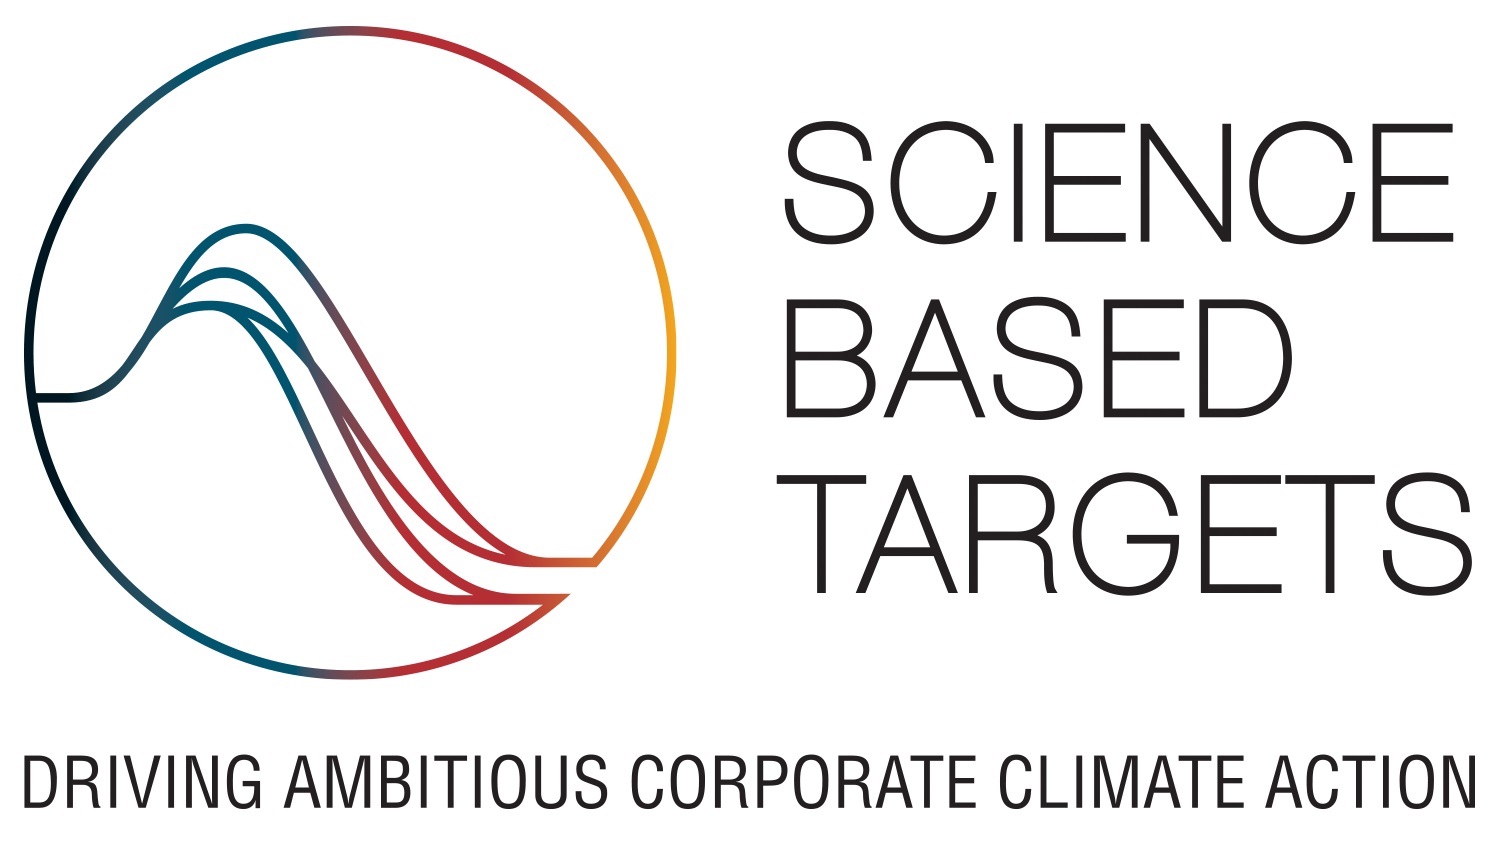 SBTi - the global body that assesses corporate climate targets